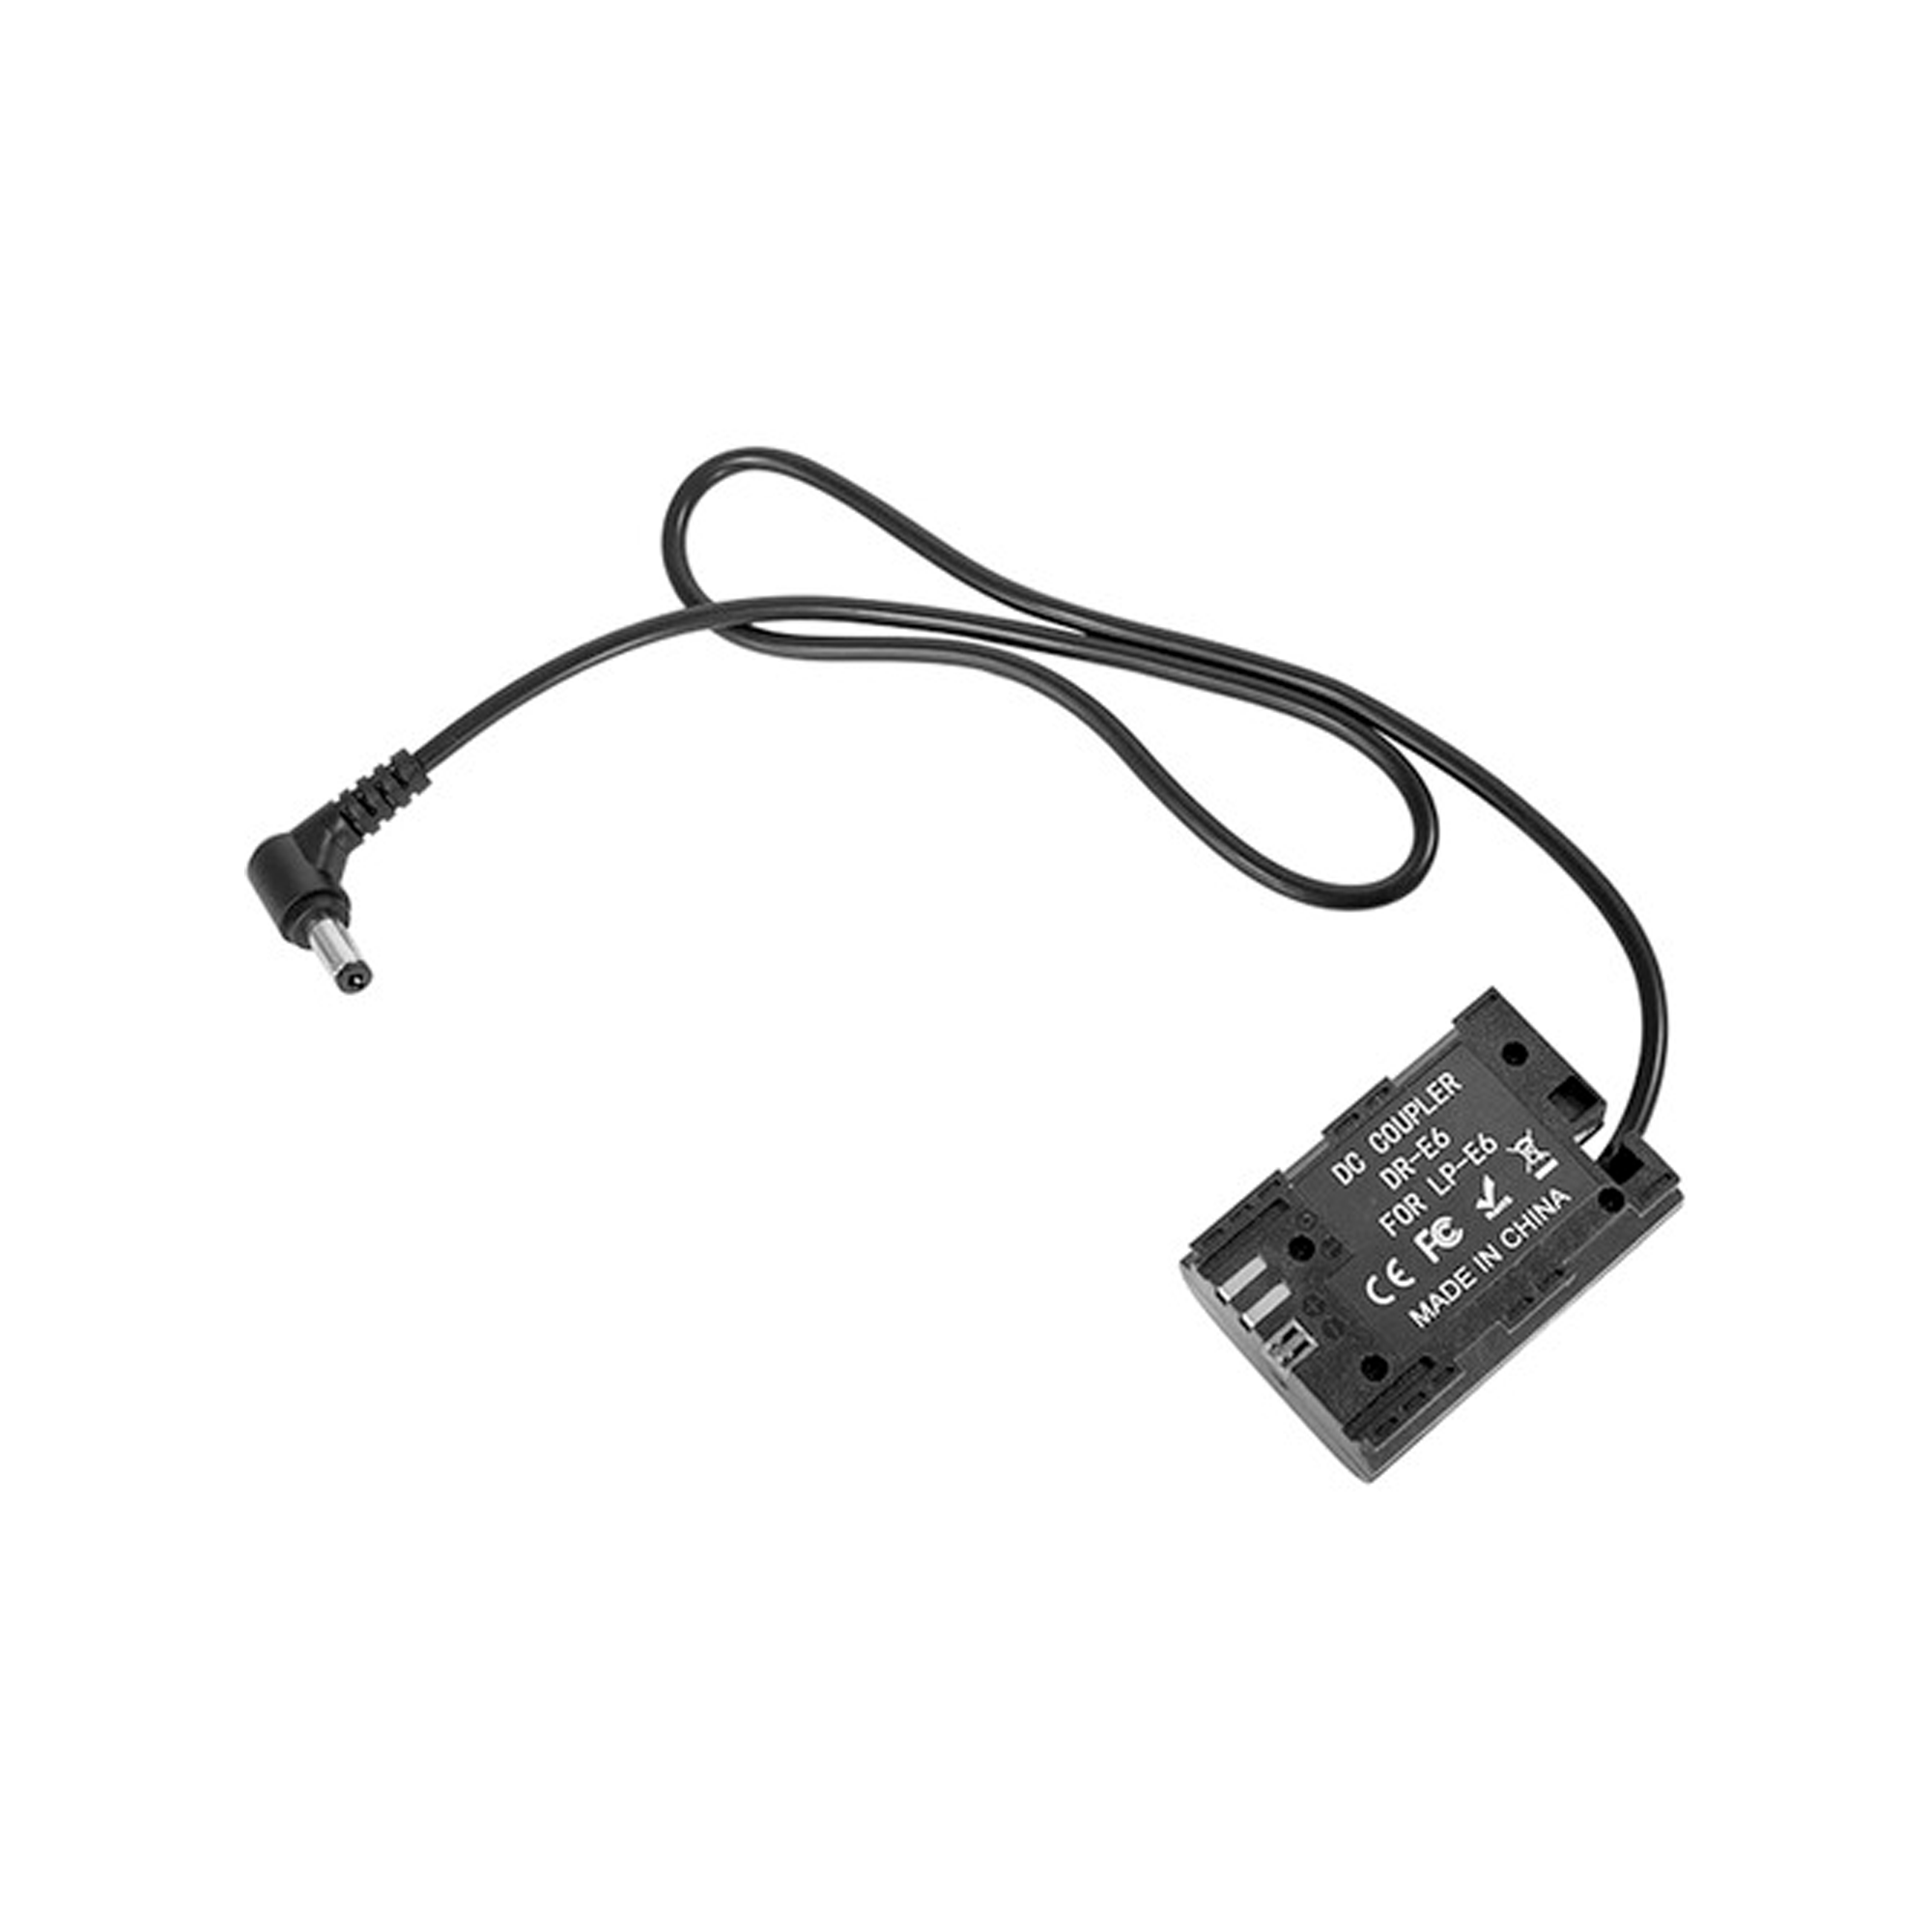 SmallRig Data Cable for DC5521 to LP-E6 Dummy Battery 2919